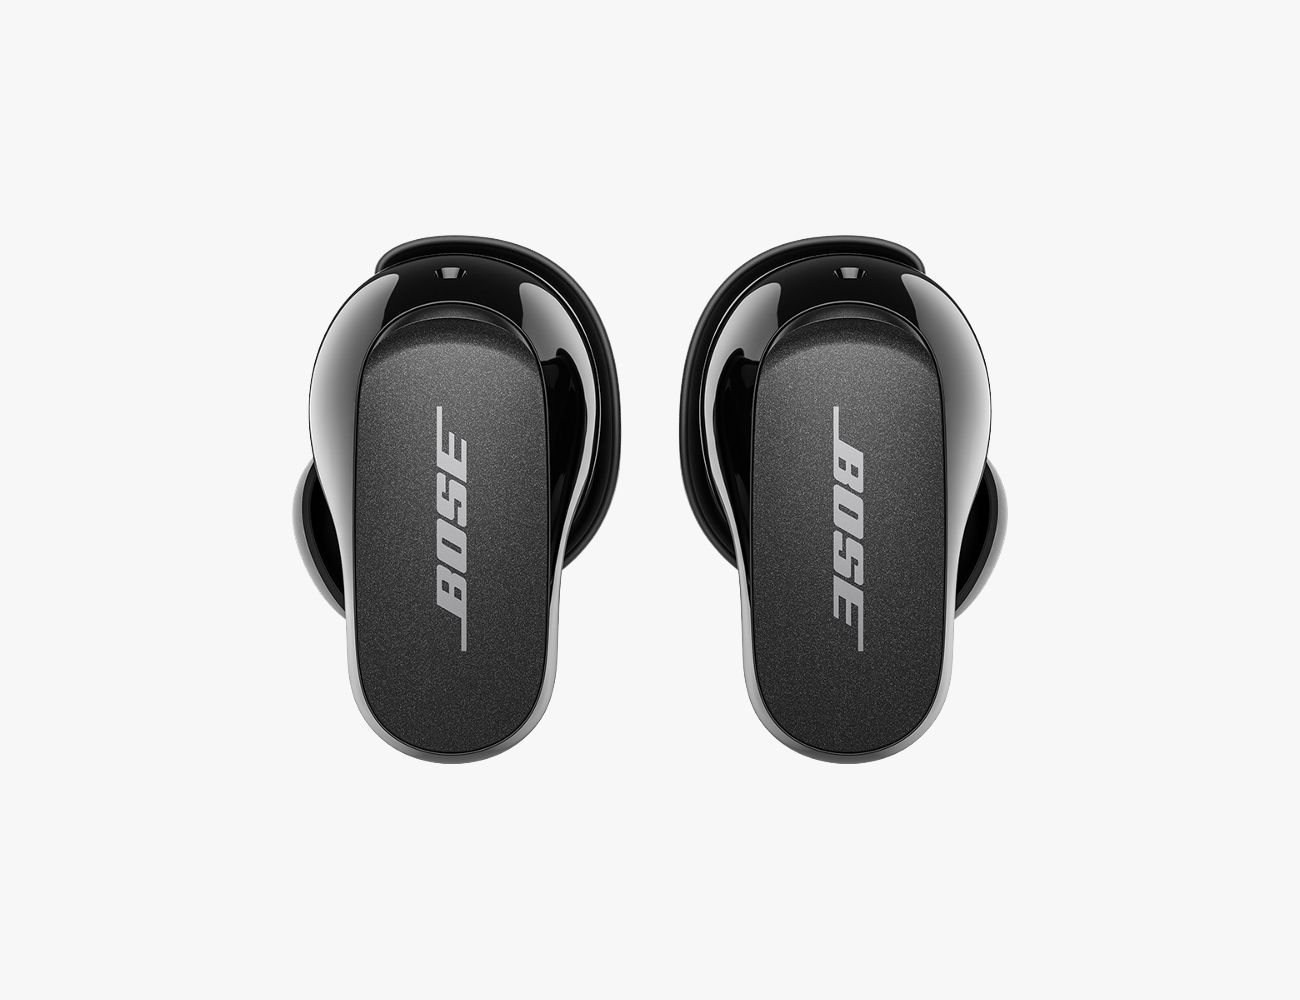 Bose QuietComfort Earbuds II Review: Noise-Cancellation Kings